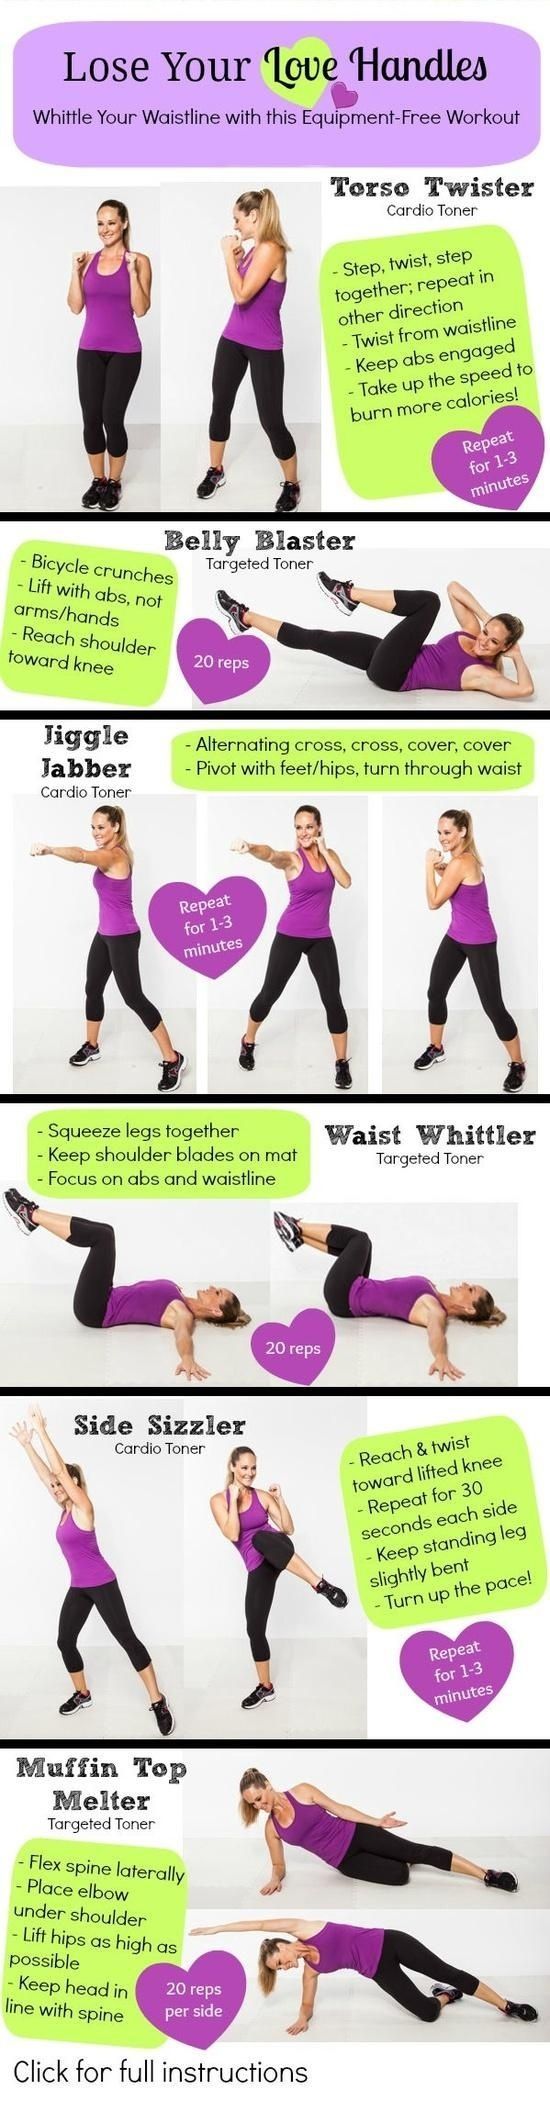 Now these are some ab exercises I m